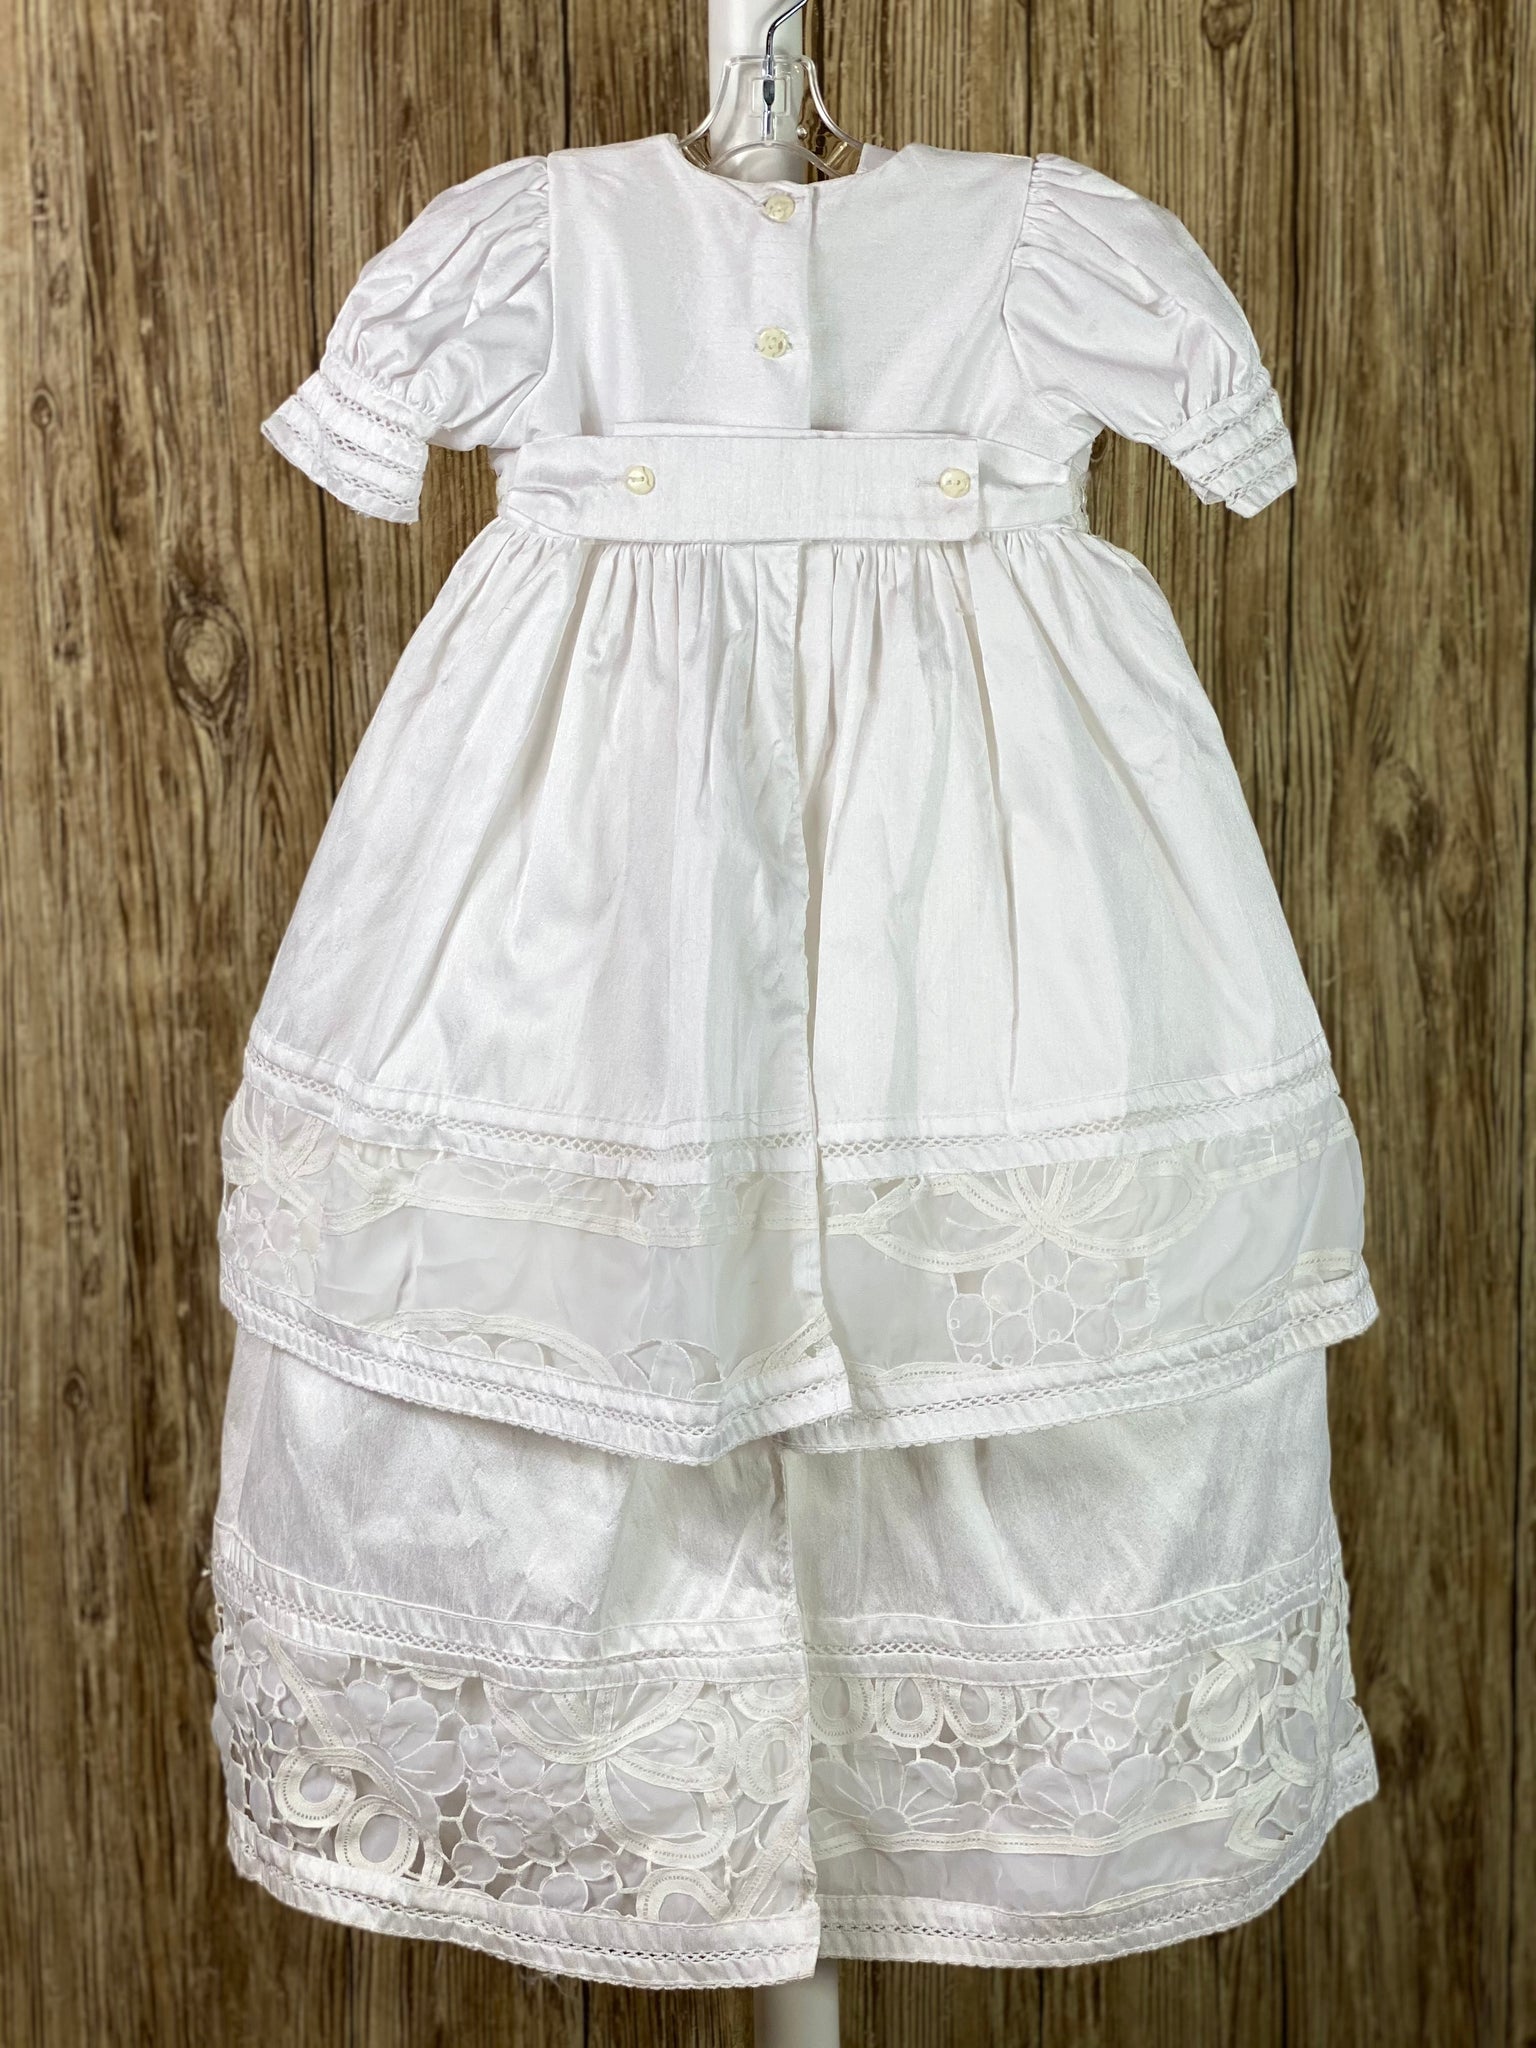 This a beautiful, one-of-a-kind baptism gown.  A lovely gown for a precious child.  White, size 24M Two layered dress Satin bodice with lace detailing Rhinestones along bodice center Flower bundle along bodice edge Puffed satin sleeves with lace trim Satin skirting with thick lace detailing Satin second layer with thick lace detailing Button closure in the back